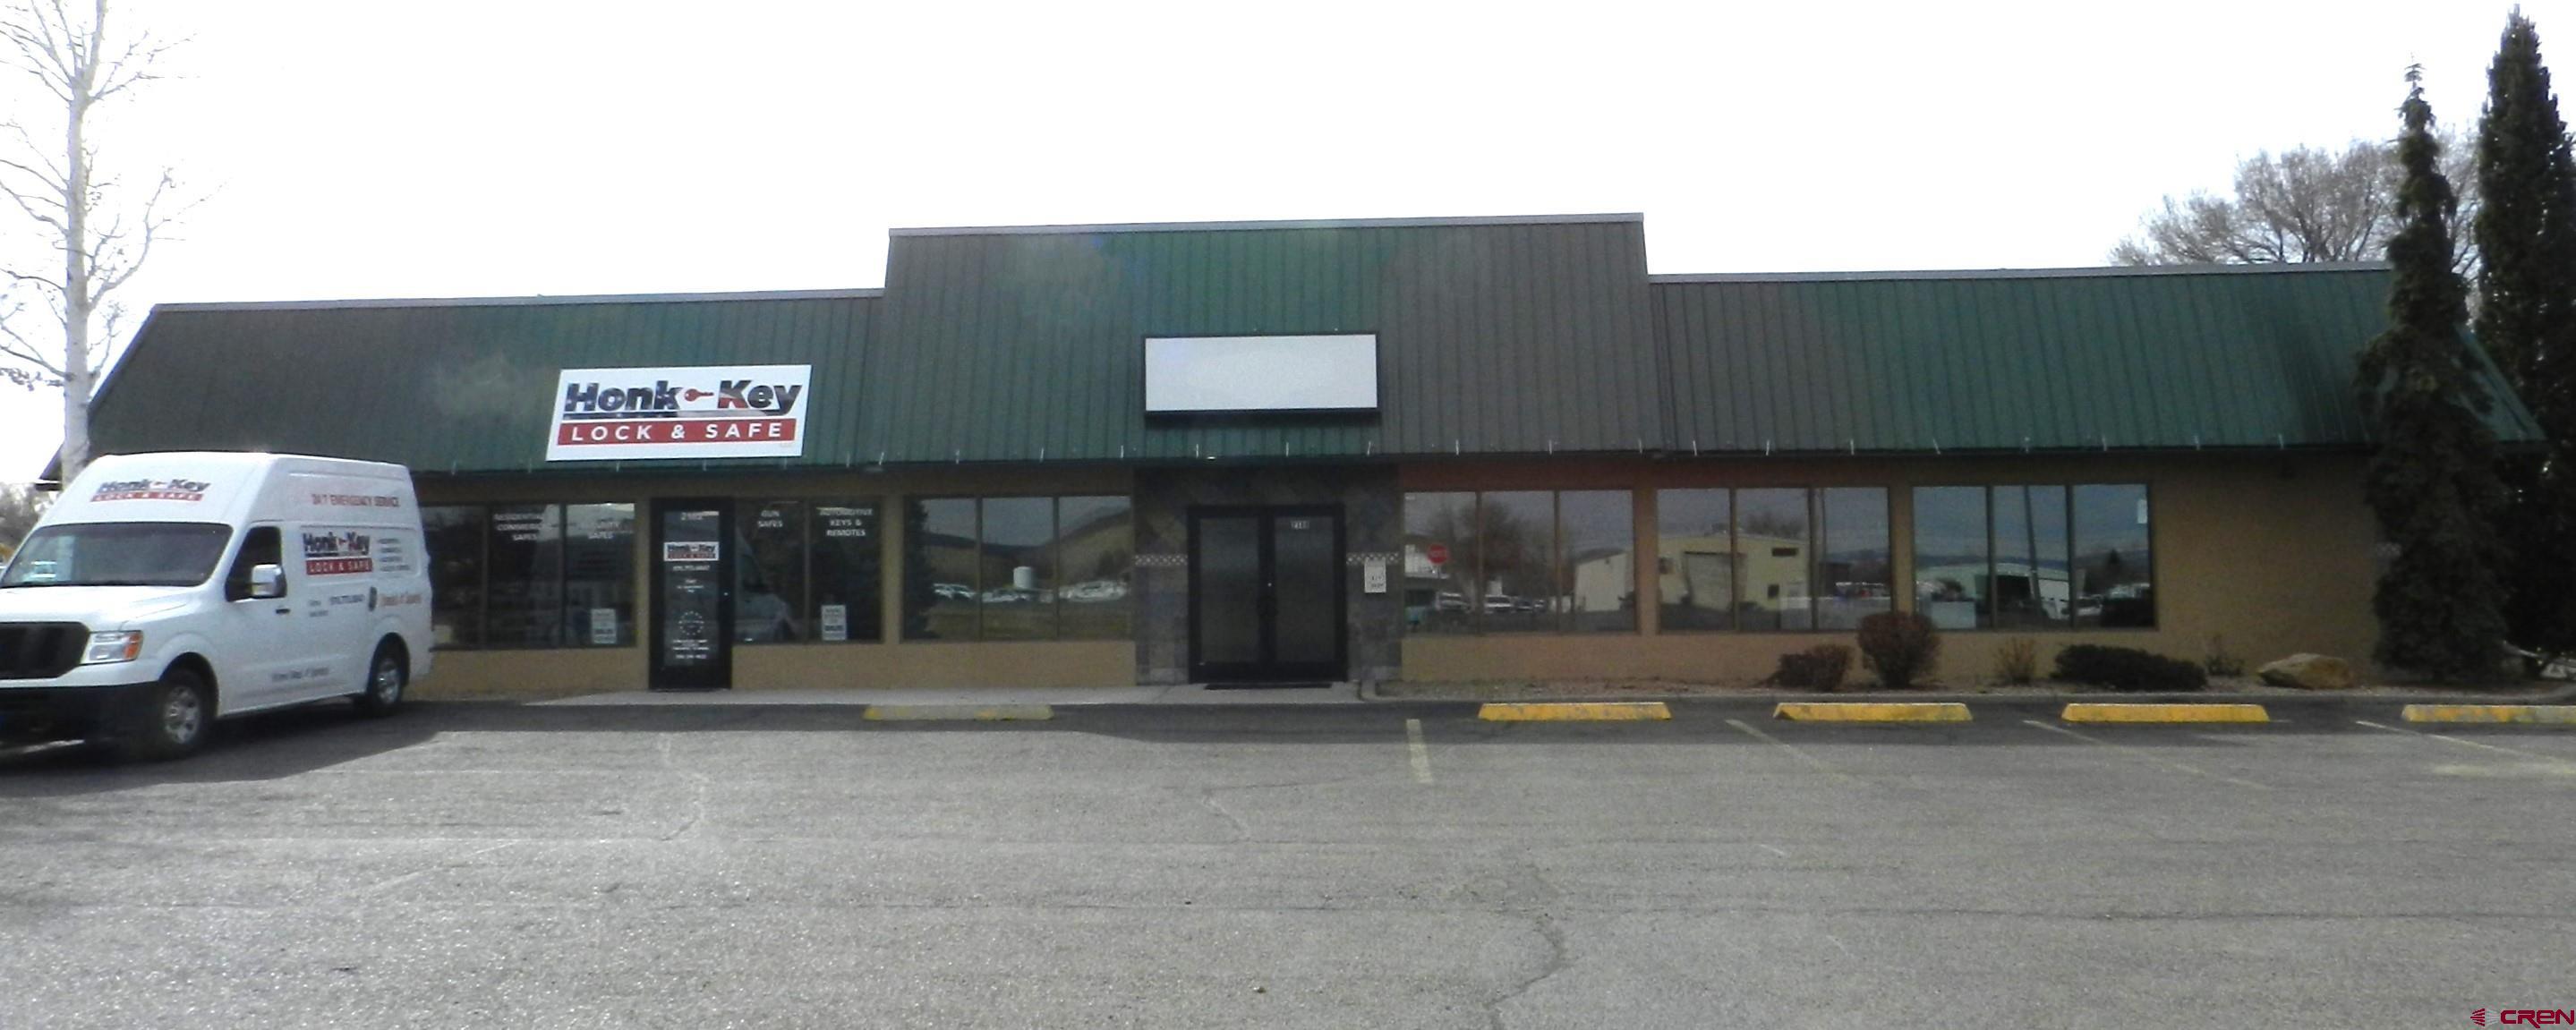 Three commercial buildings totaling ~14,906 sq.ft. on a ~.97-acre, privacy fenced back lot, adjacent to Hwy 50, between Turner Automotive and Stay Wise Inn. Building #1 is ~9040 sq.ft. and includes retail showroom, 3+ offices, and warehouse with an overhead door. Building #2 is ~920 sq.ft. and has a kitchenette. Building #3 is ~4,946 sq.ft. with an ADA bathroom, 3 large overhead doors, and hydraulic lift table loading dock. Building #4 is not included in sale and will be removed. Zoned B-3 in the City of Montrose. High-traffic count. Highly visible signage.